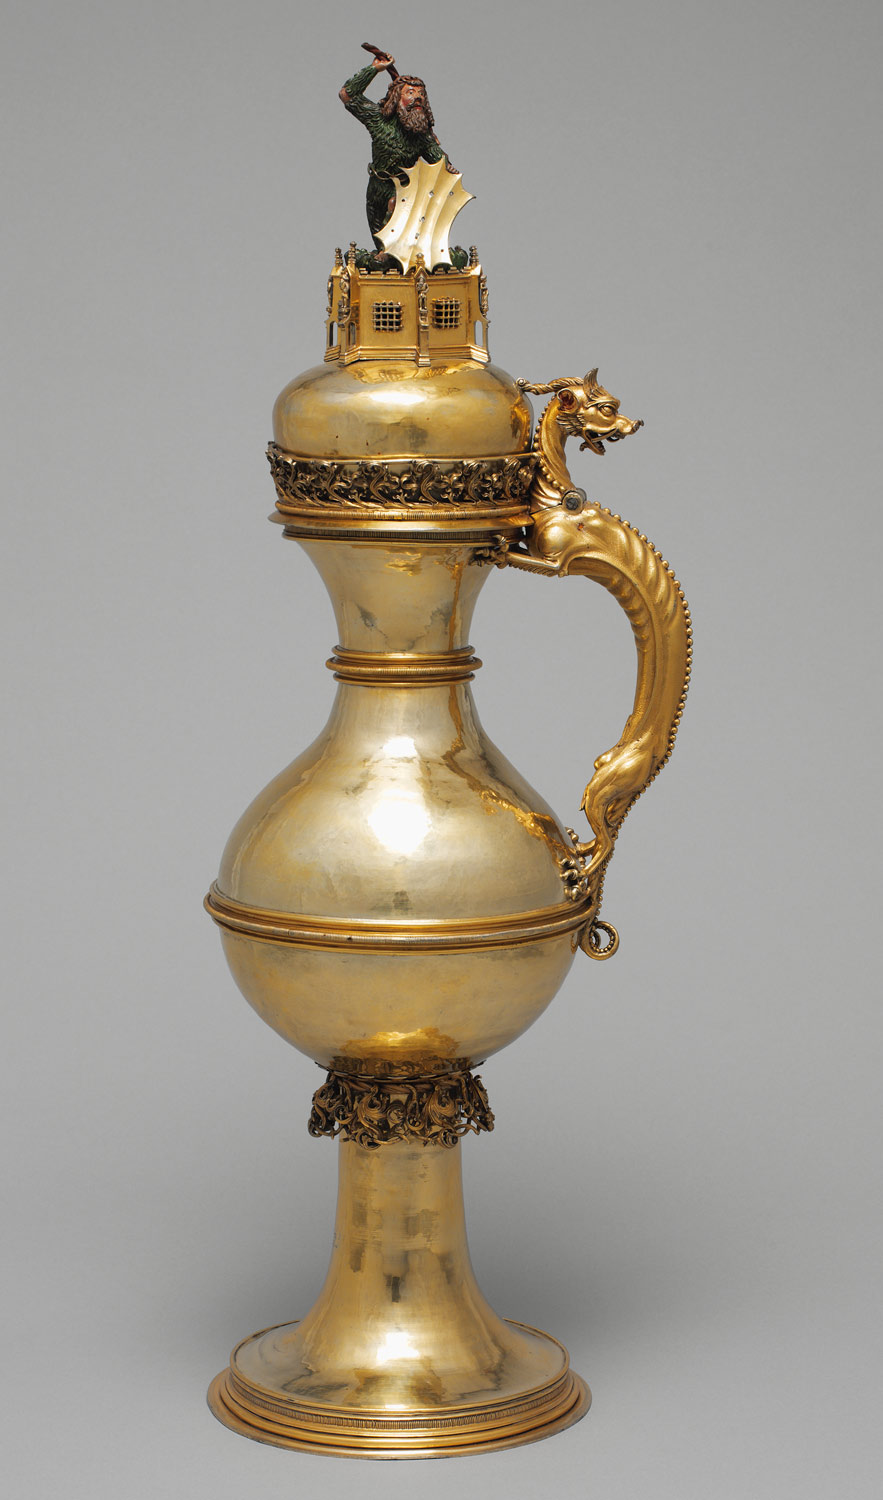 Ewer with Wild Man Finial